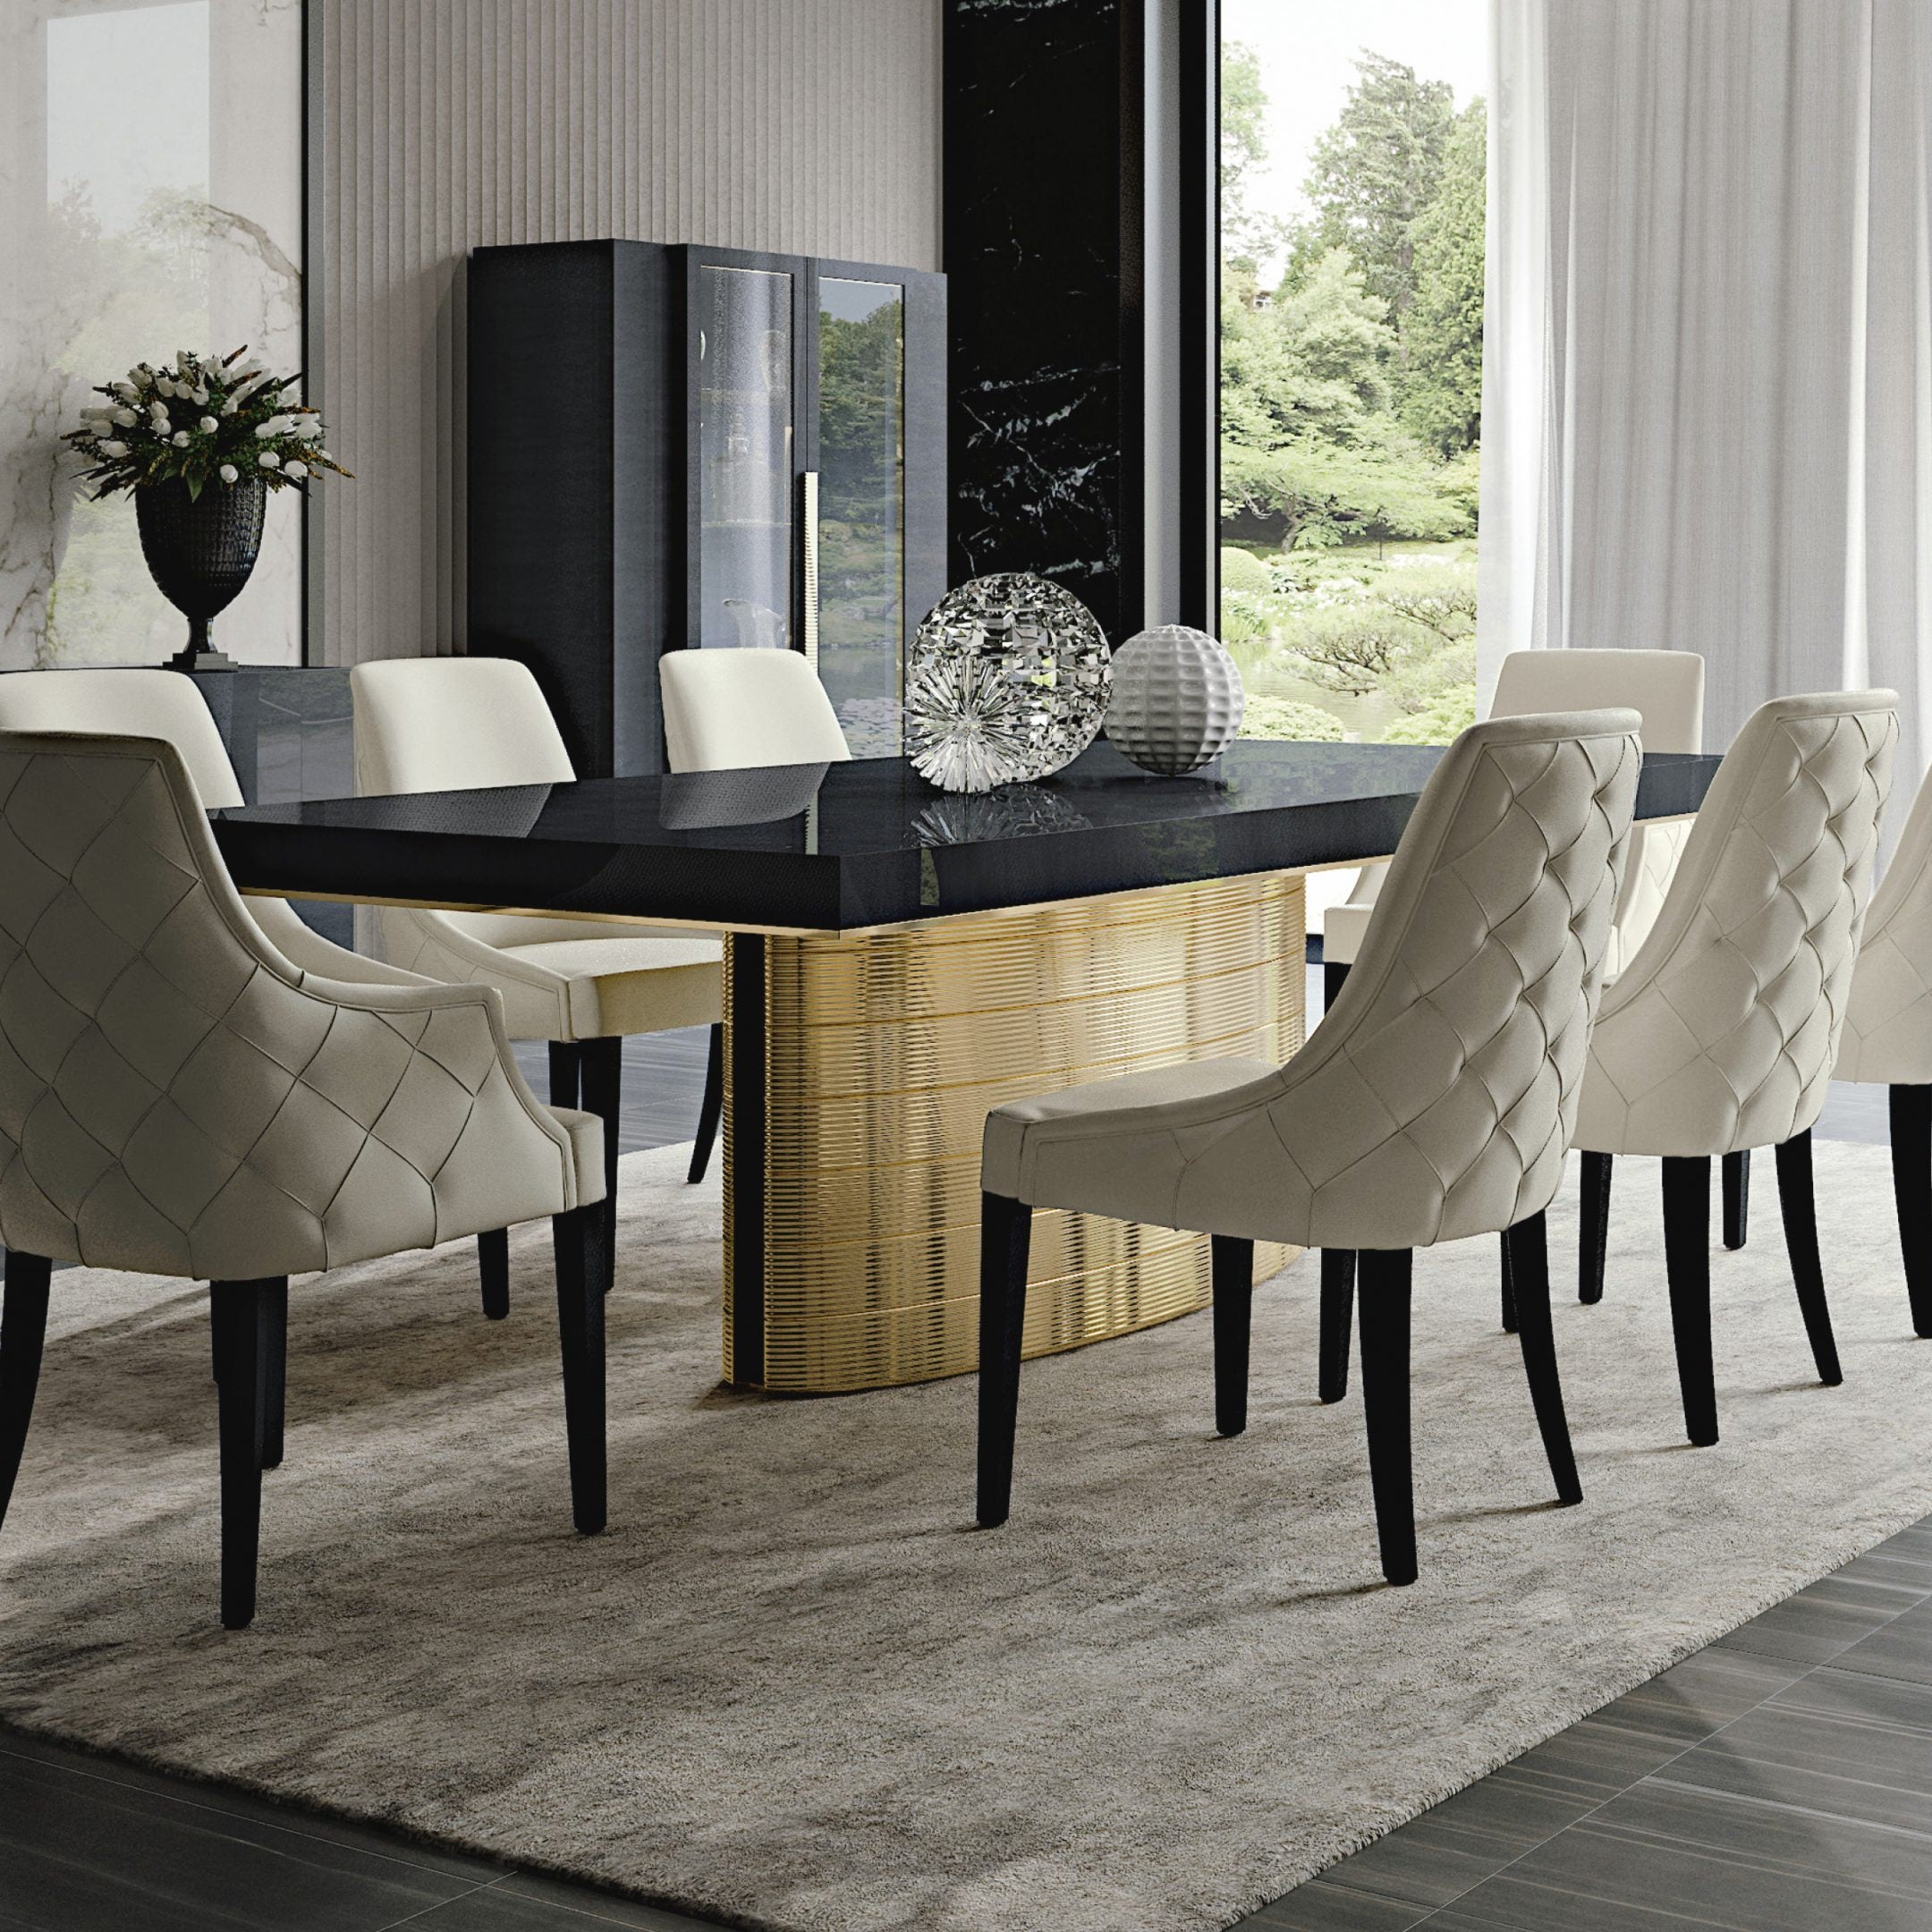 Modern classic collection_SECRET LOVE dining chairs3